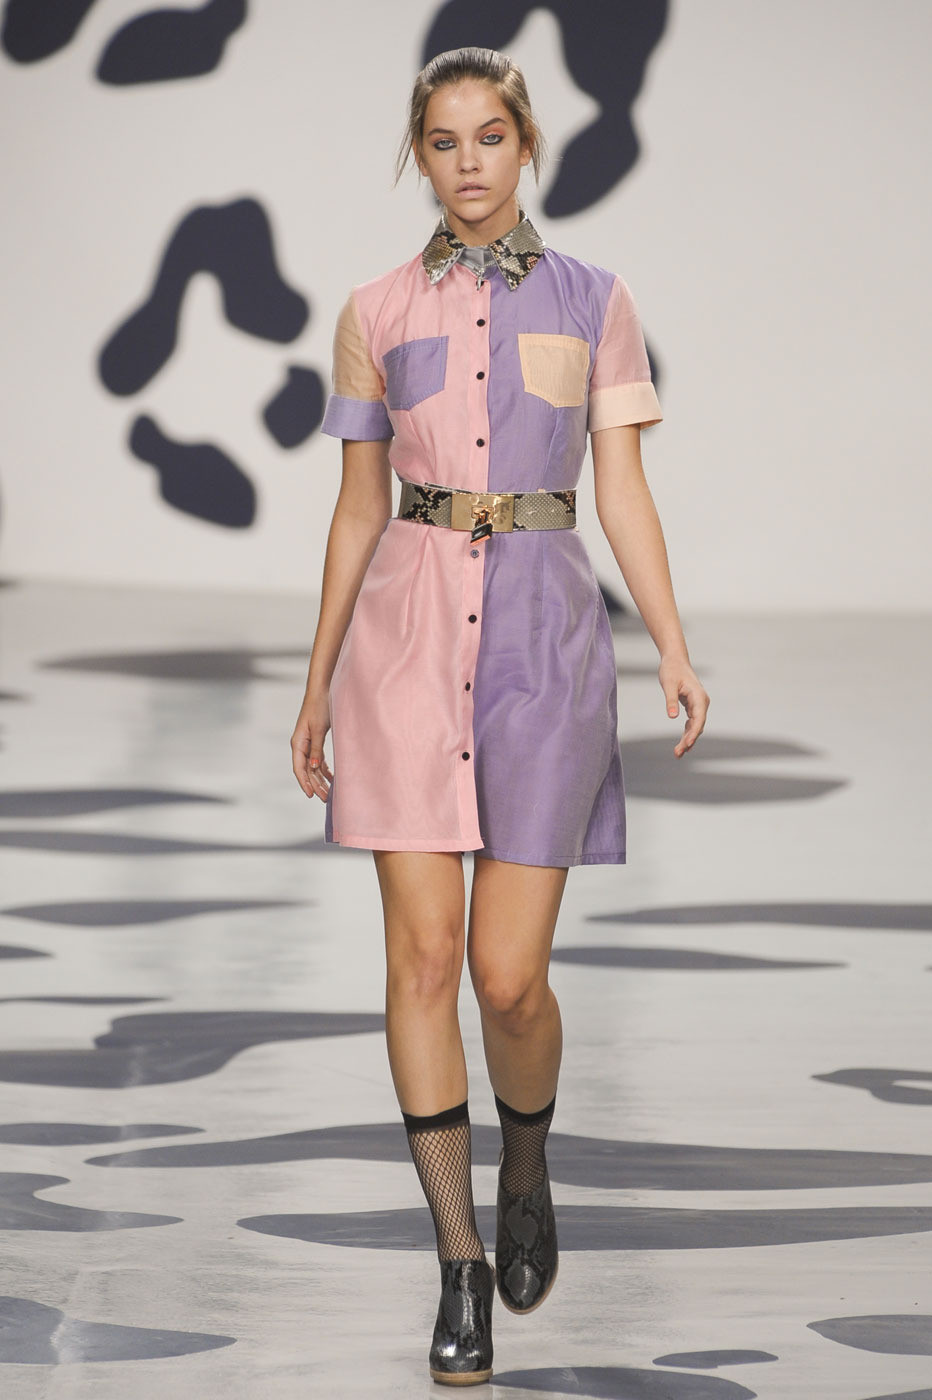 House Of Holand Spring 2012 Fuv 3 t Yc 5 d 6 x